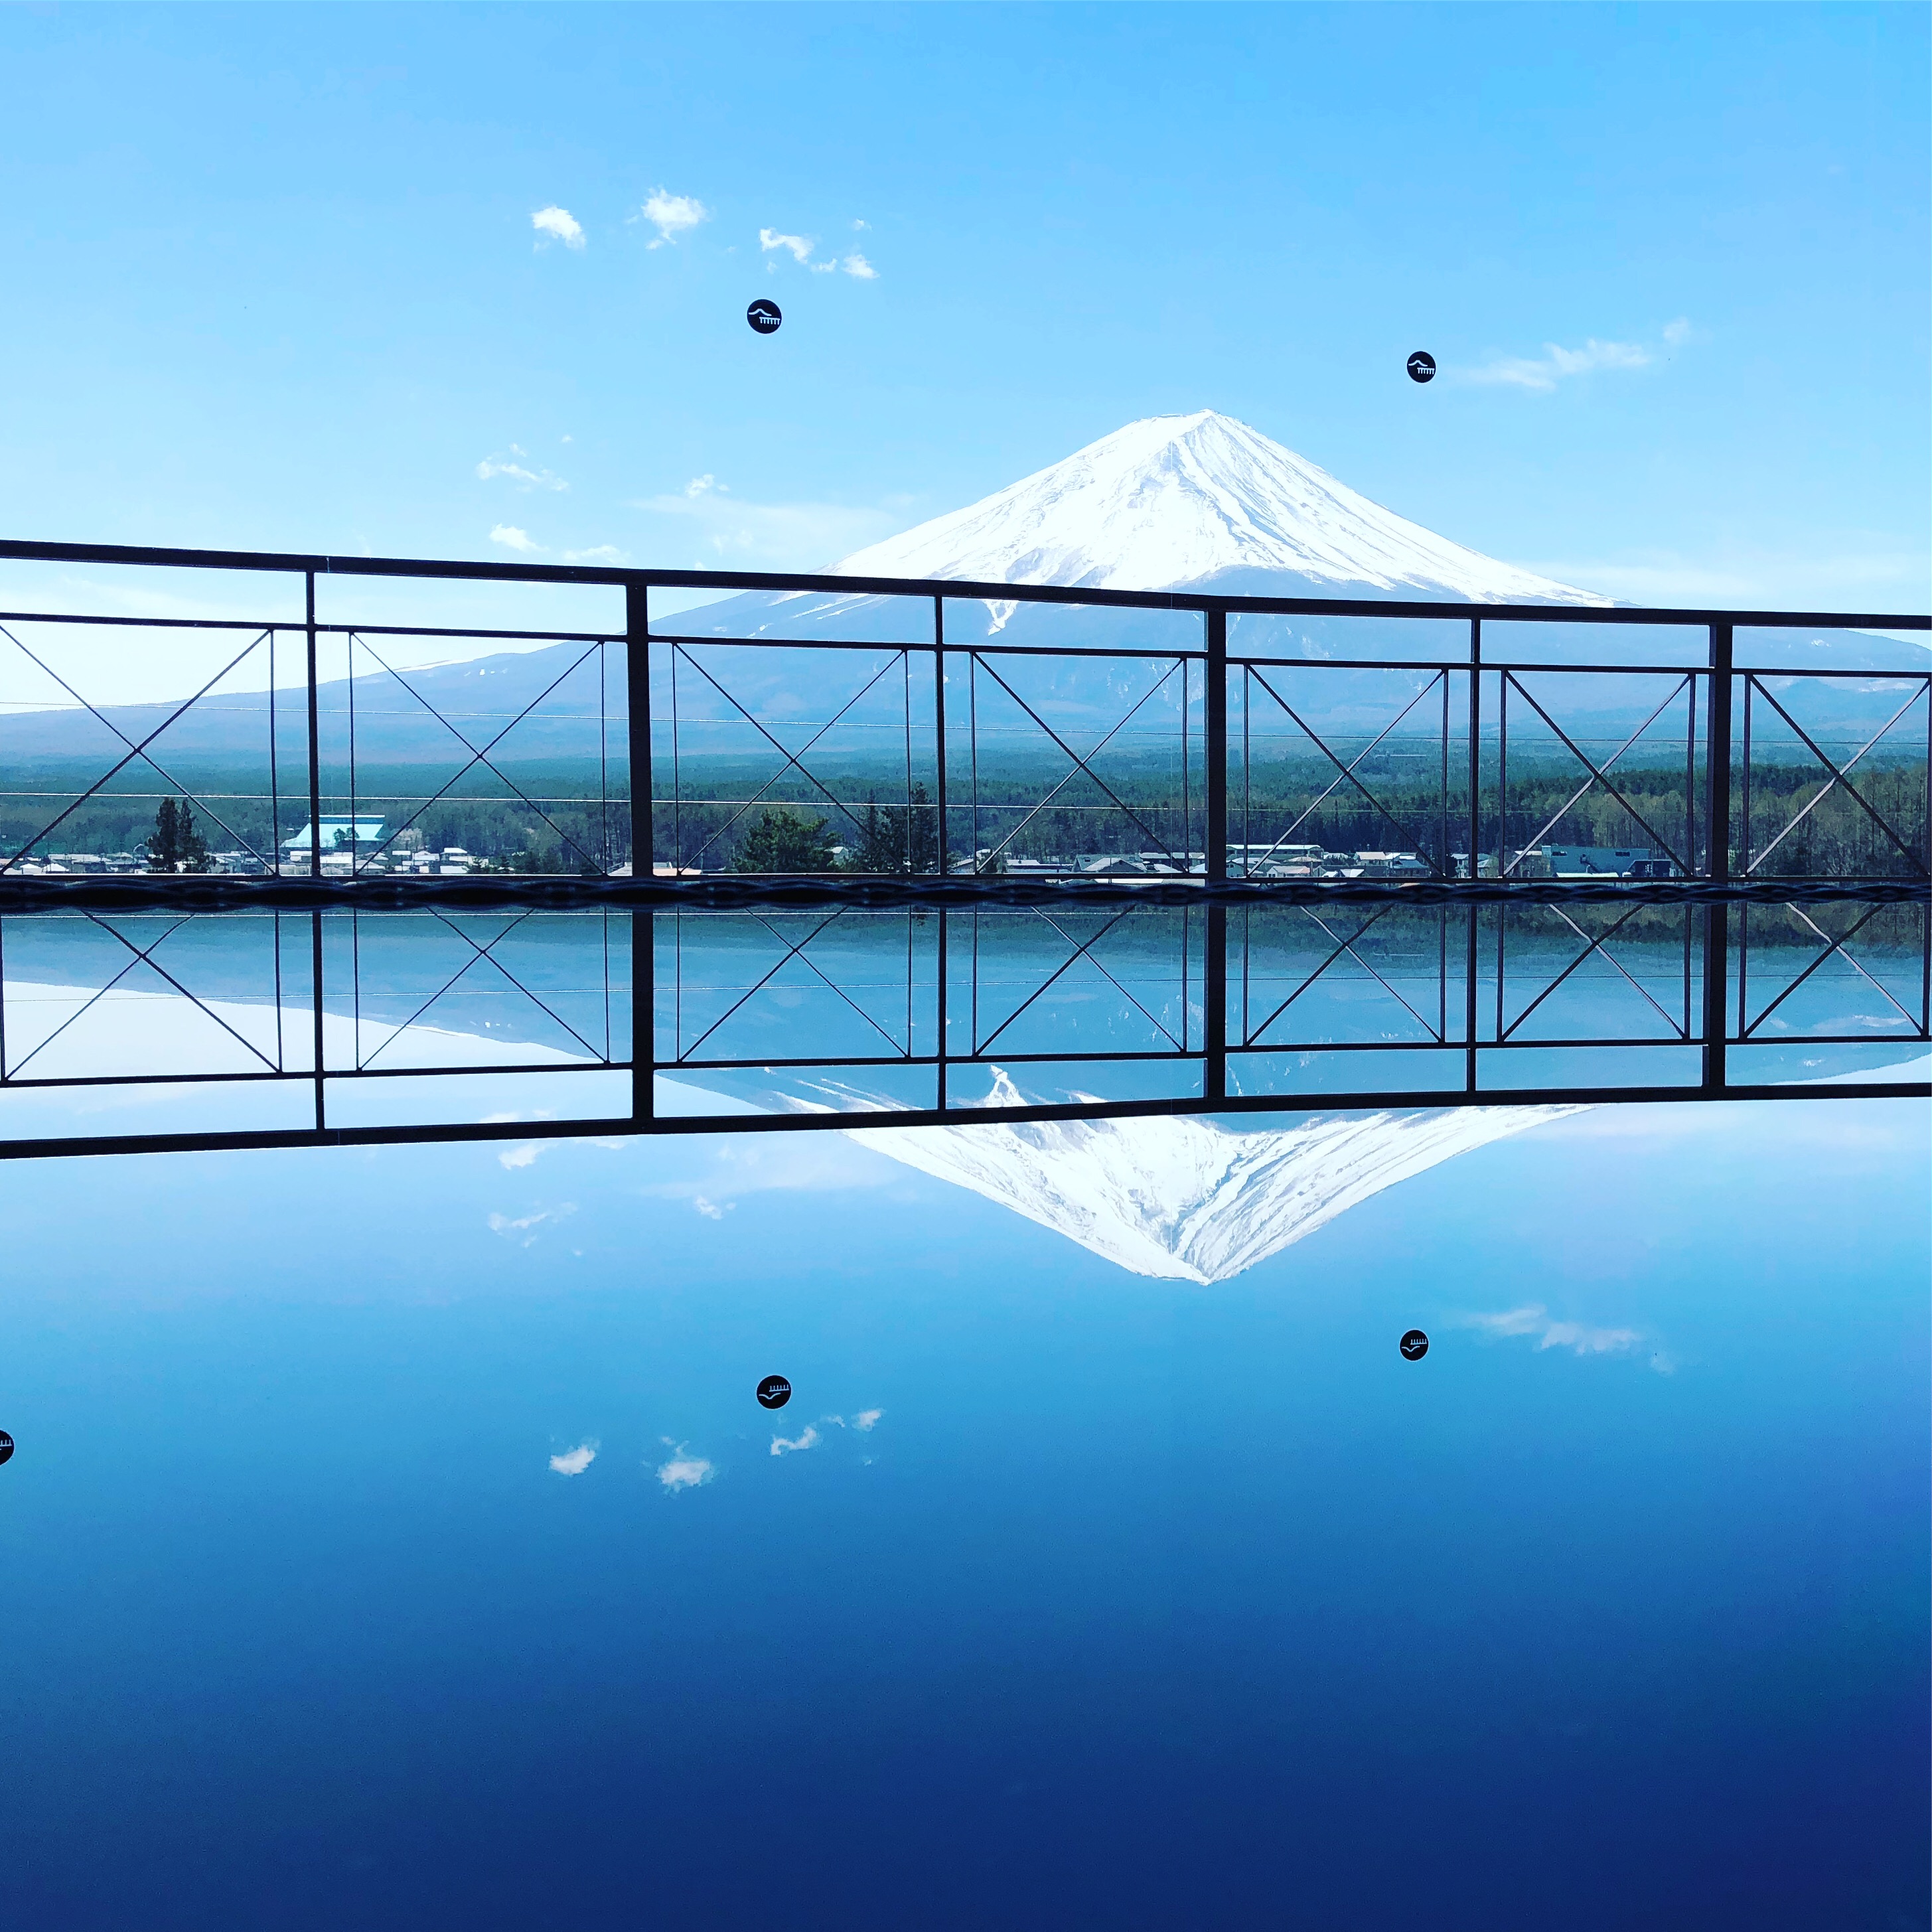 The reflection of Mt.Fuji